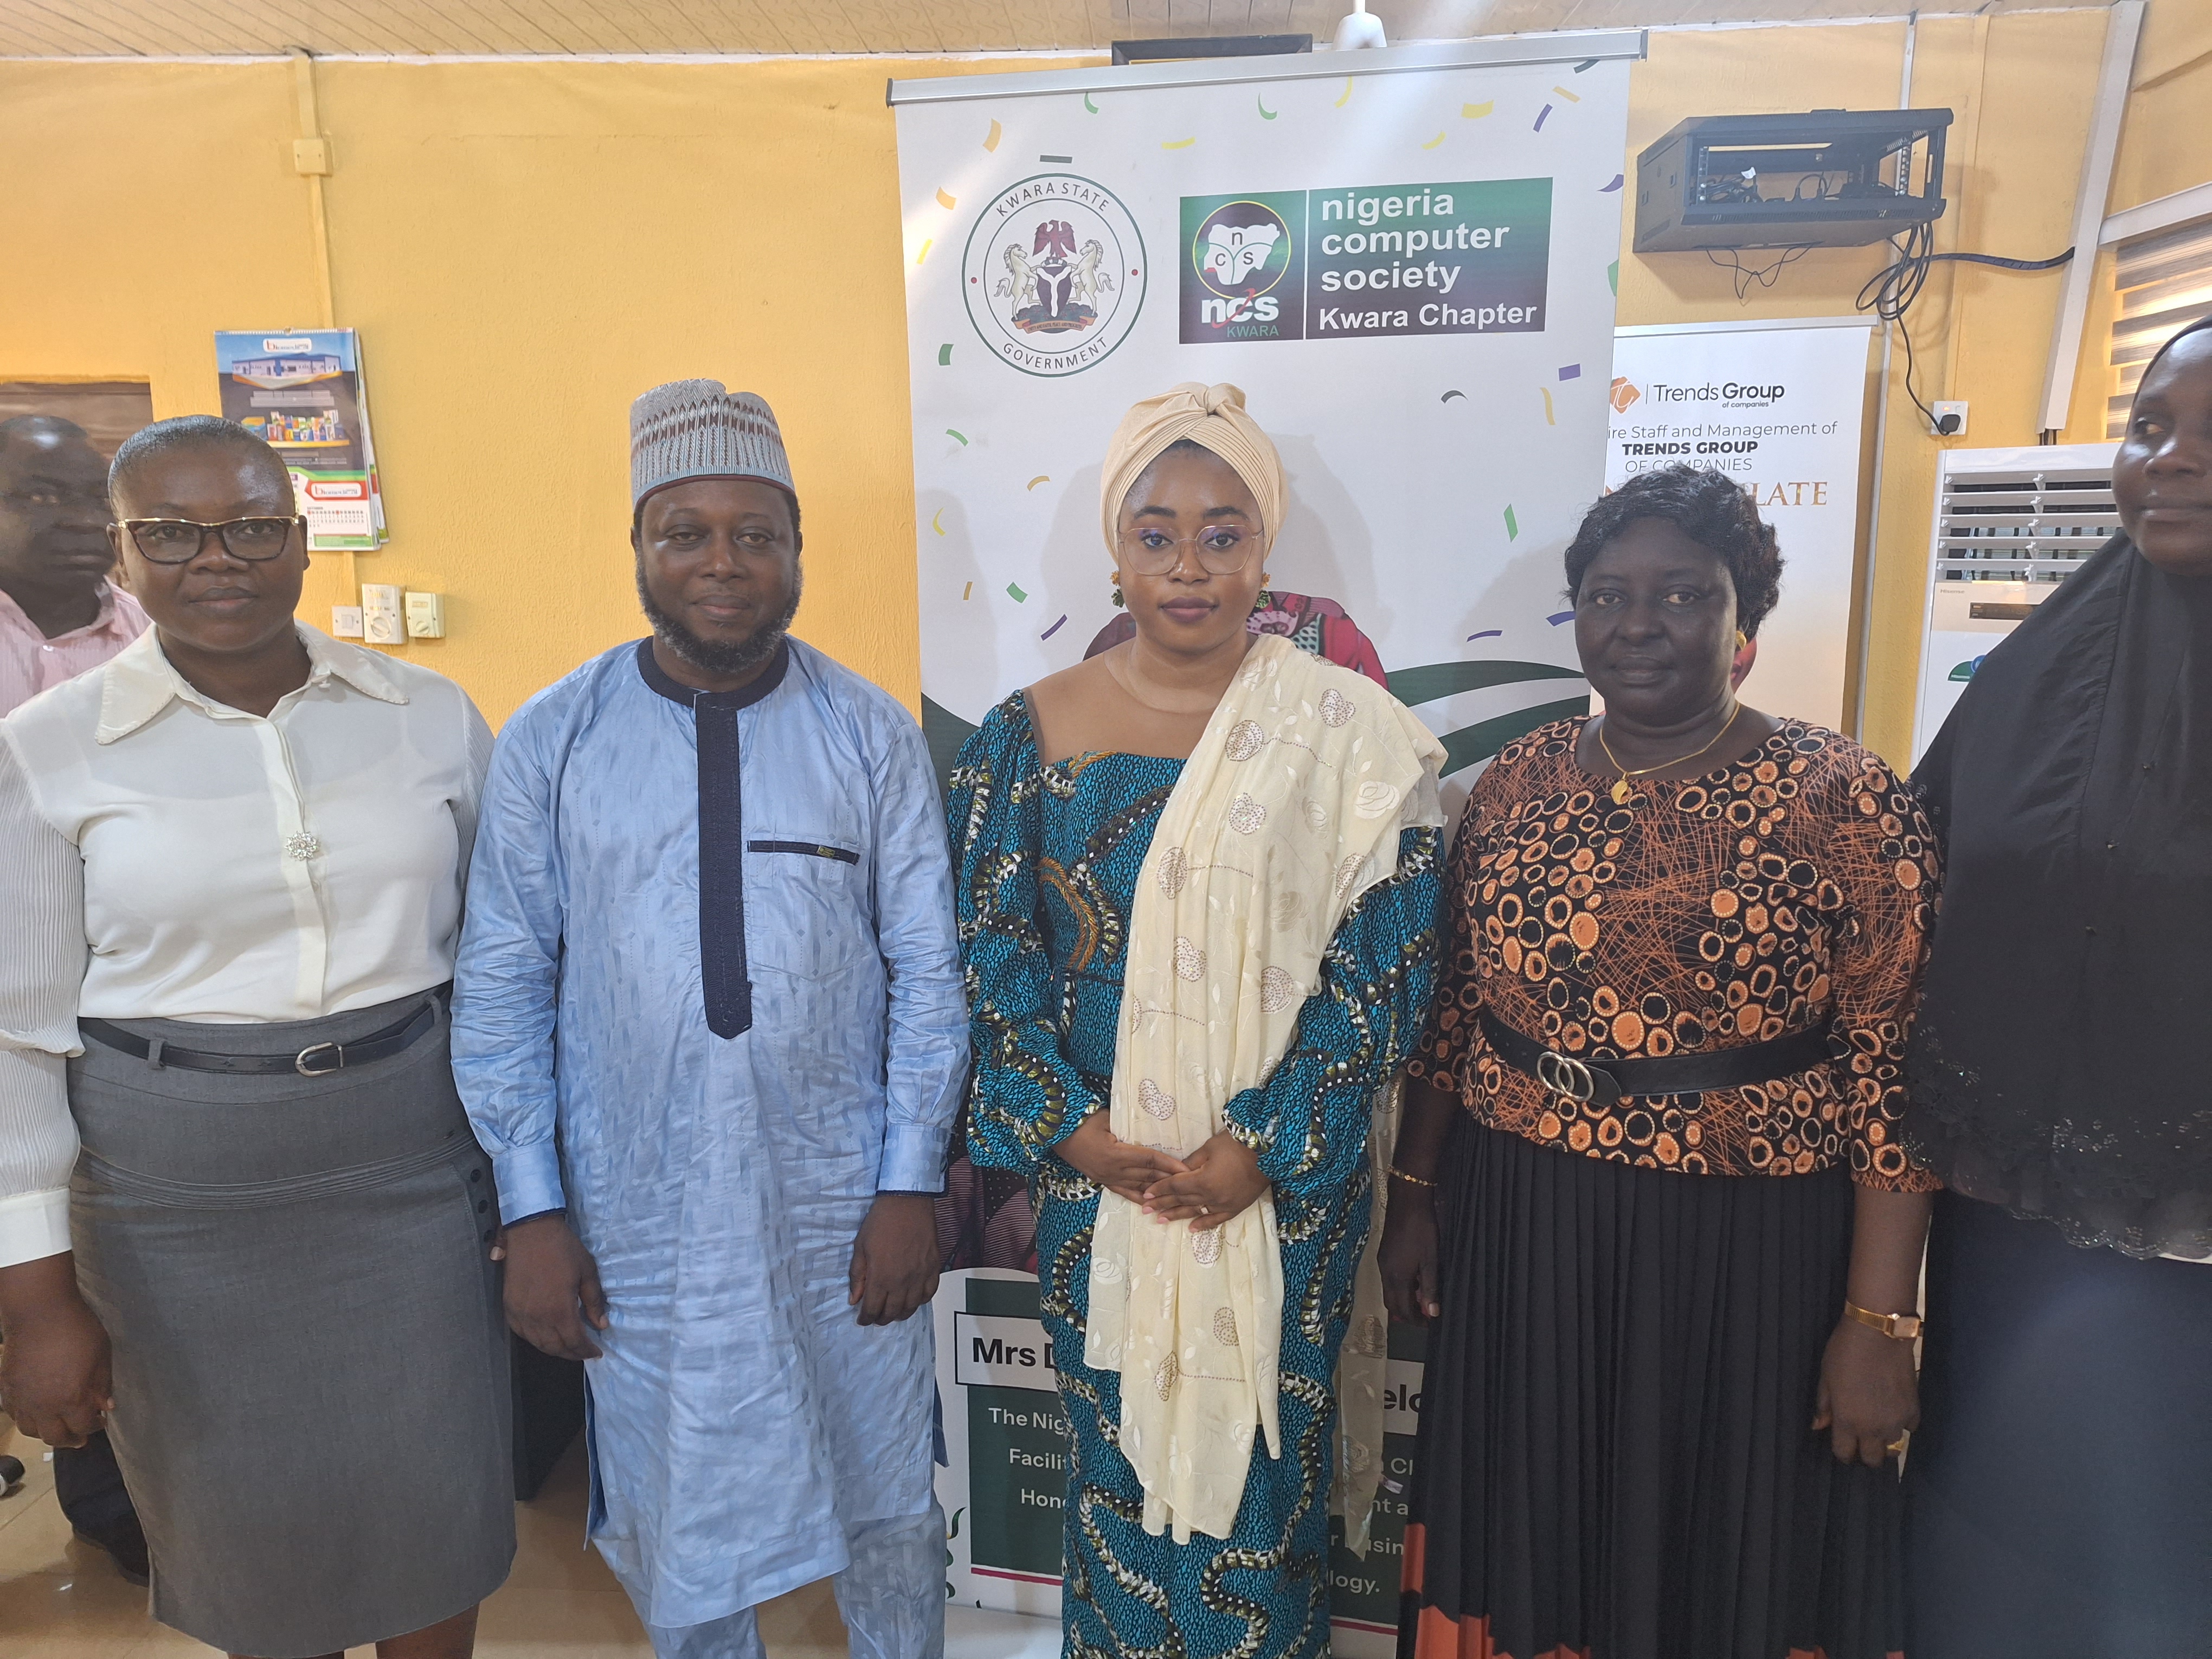 NCS Kwara Exco, Led by Taofik Abdulkareem with Mrs. Damilola Yusuf-Adelodun, the Commissioner for Business, Innovation, and Technology and the Permanent Secretary, Mrs Mary Adeosun